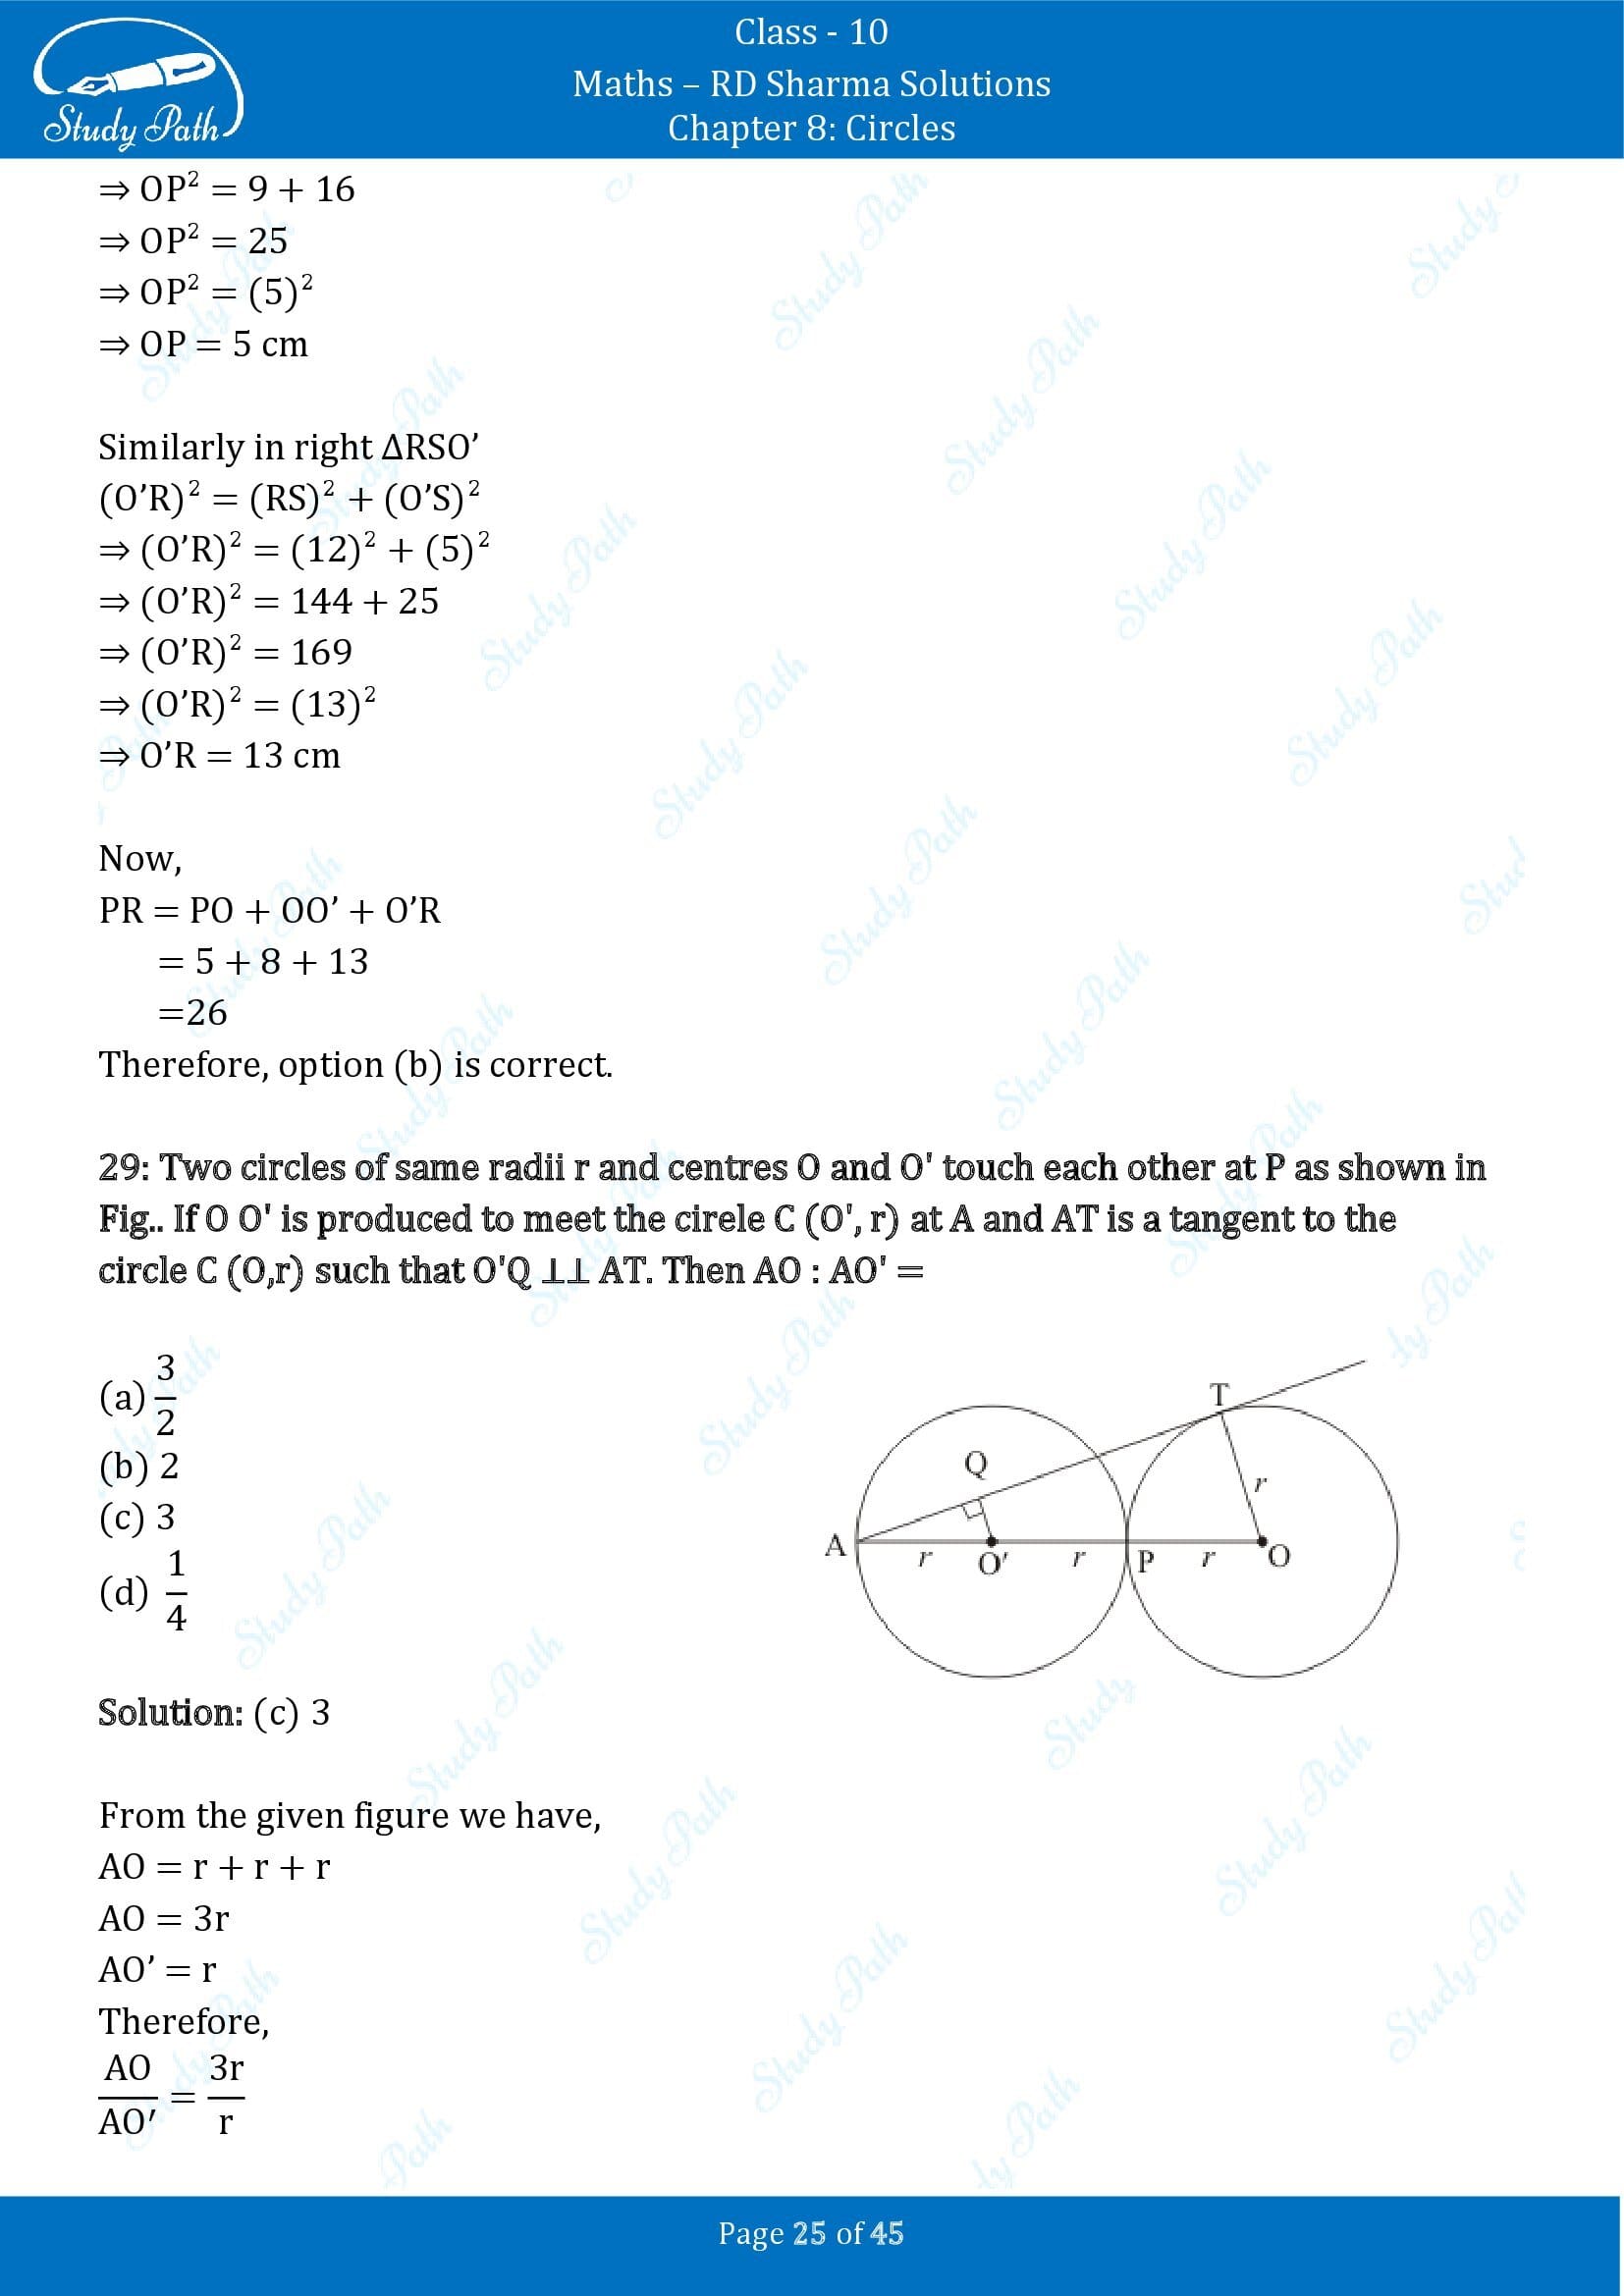 RD Sharma Solutions Class 10 Chapter 8 Circles Multiple Choice Questions MCQs 00025